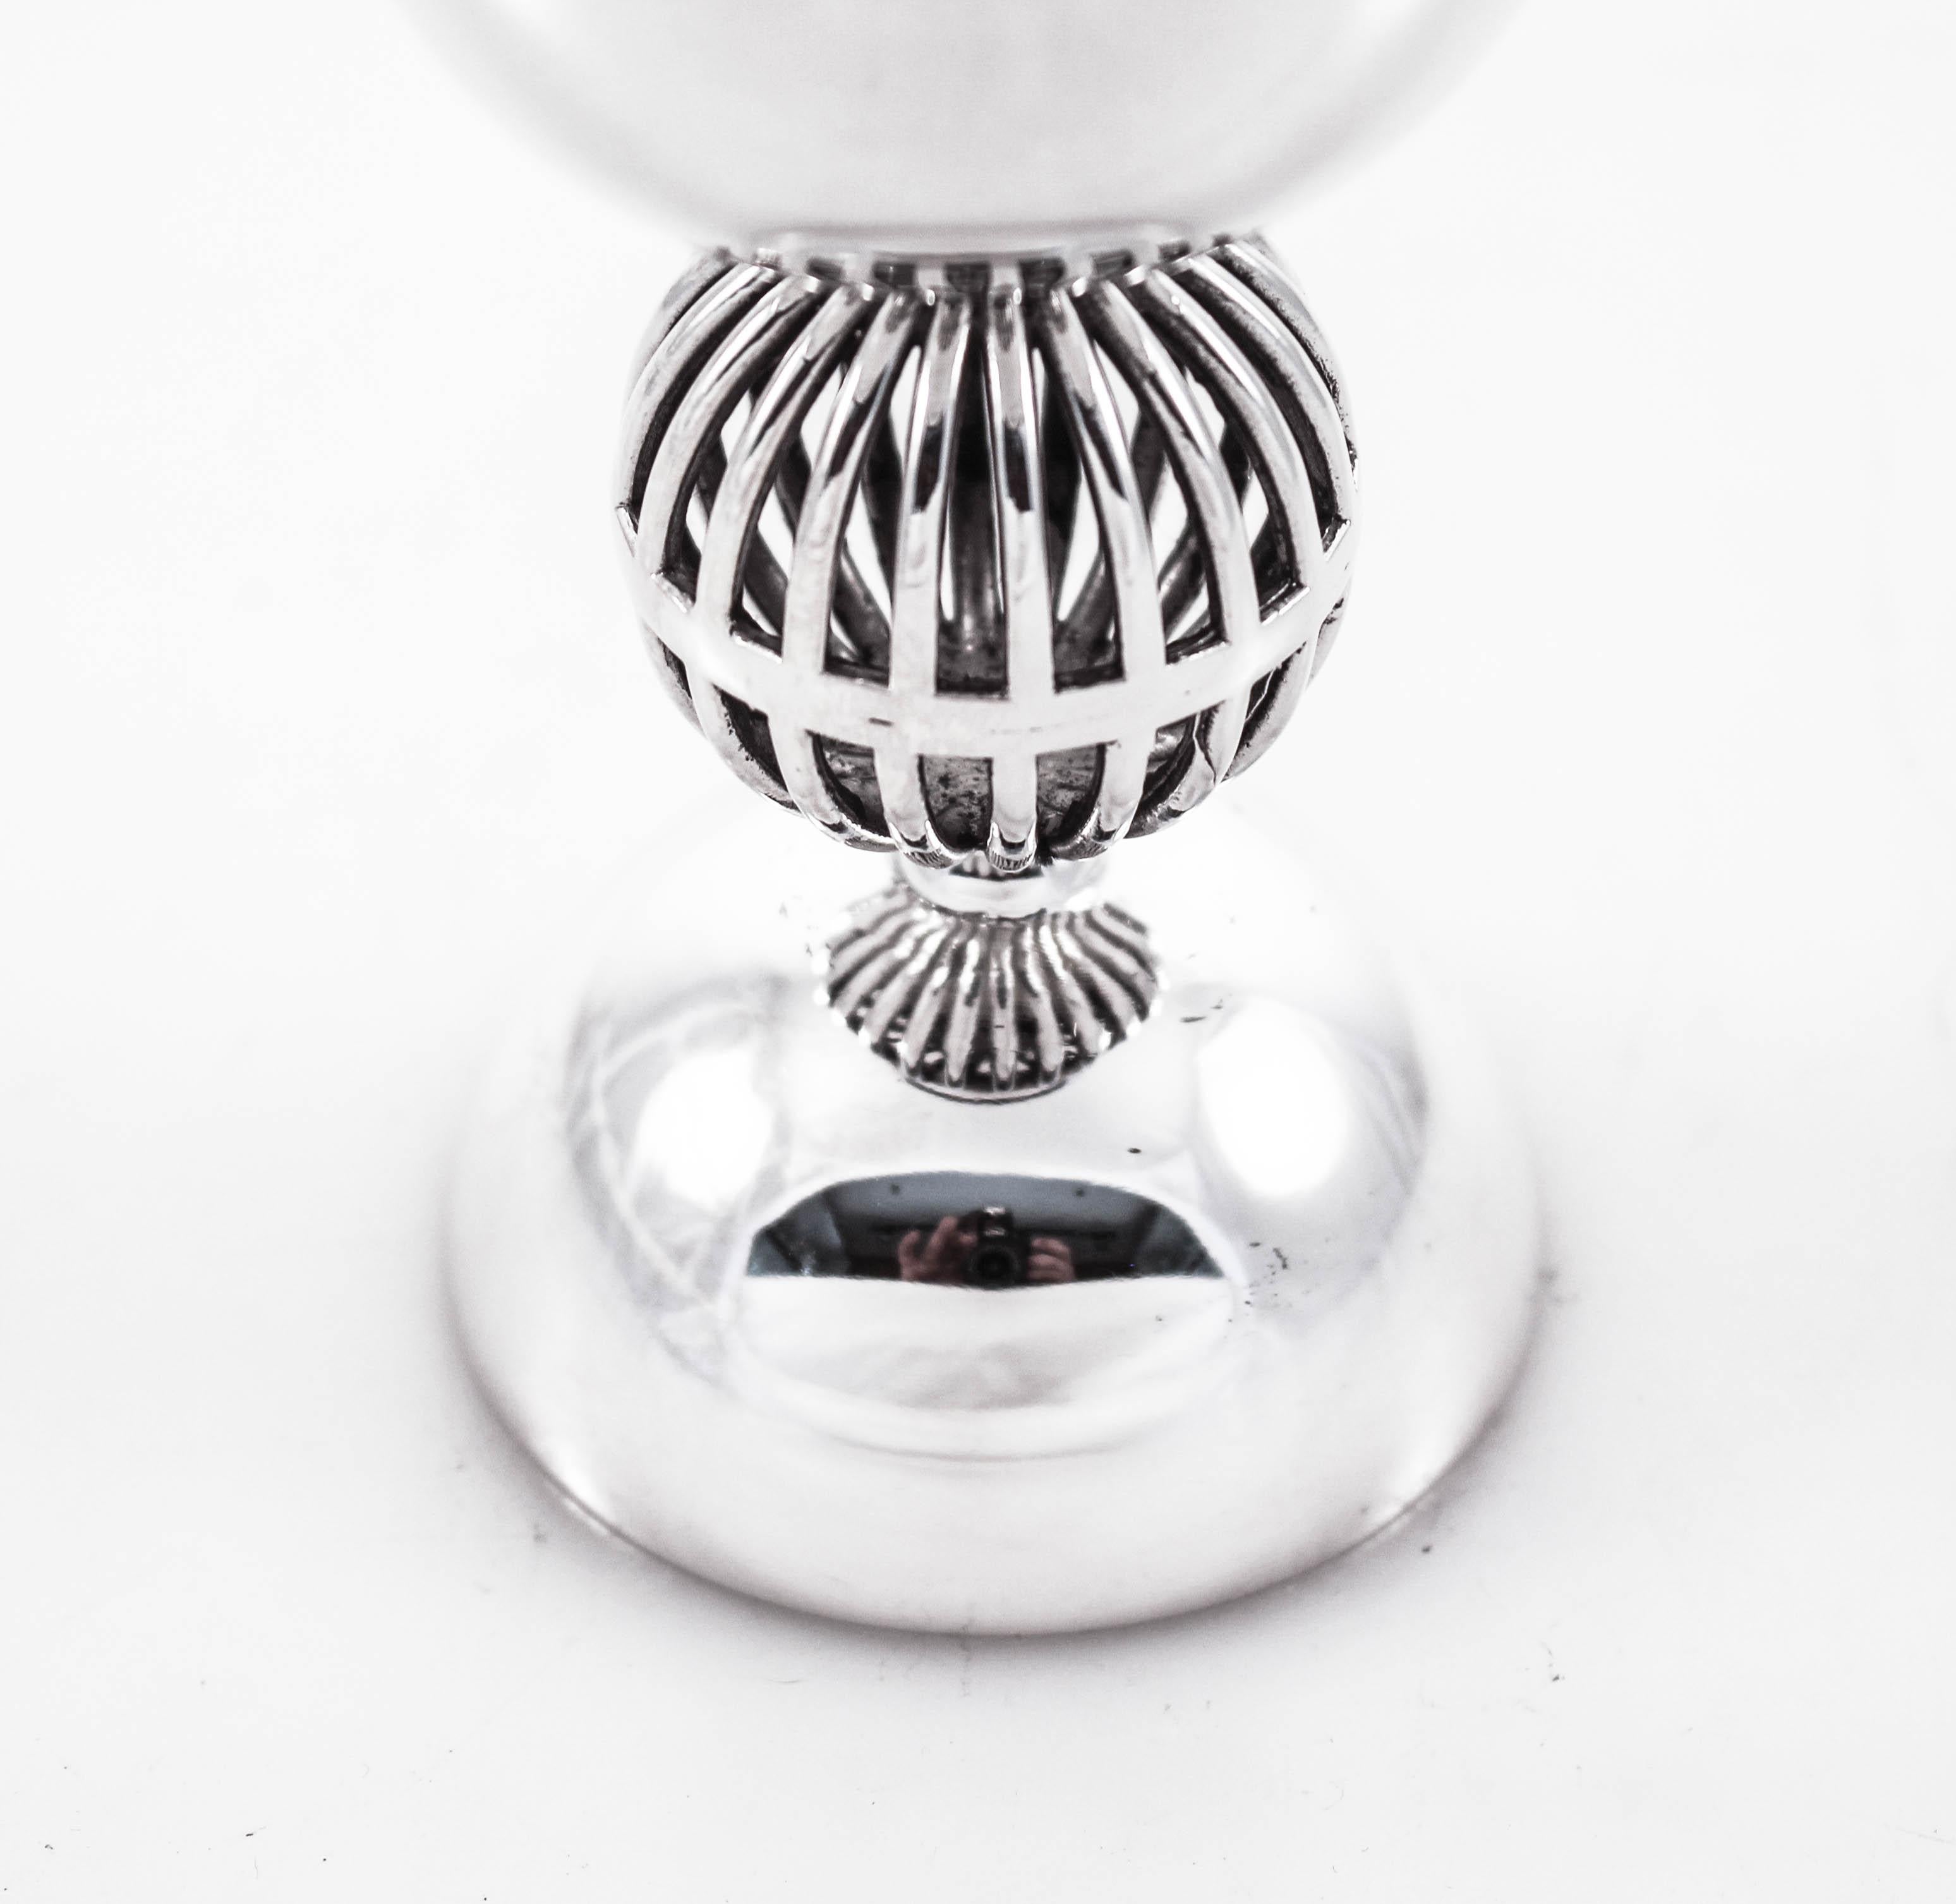 Proud to offer this sterling silver wine (Kiddush) cup. It is sleek and modern and has a “Jensenesque” feel to it. Perfect for a wedding or father’s day gift.